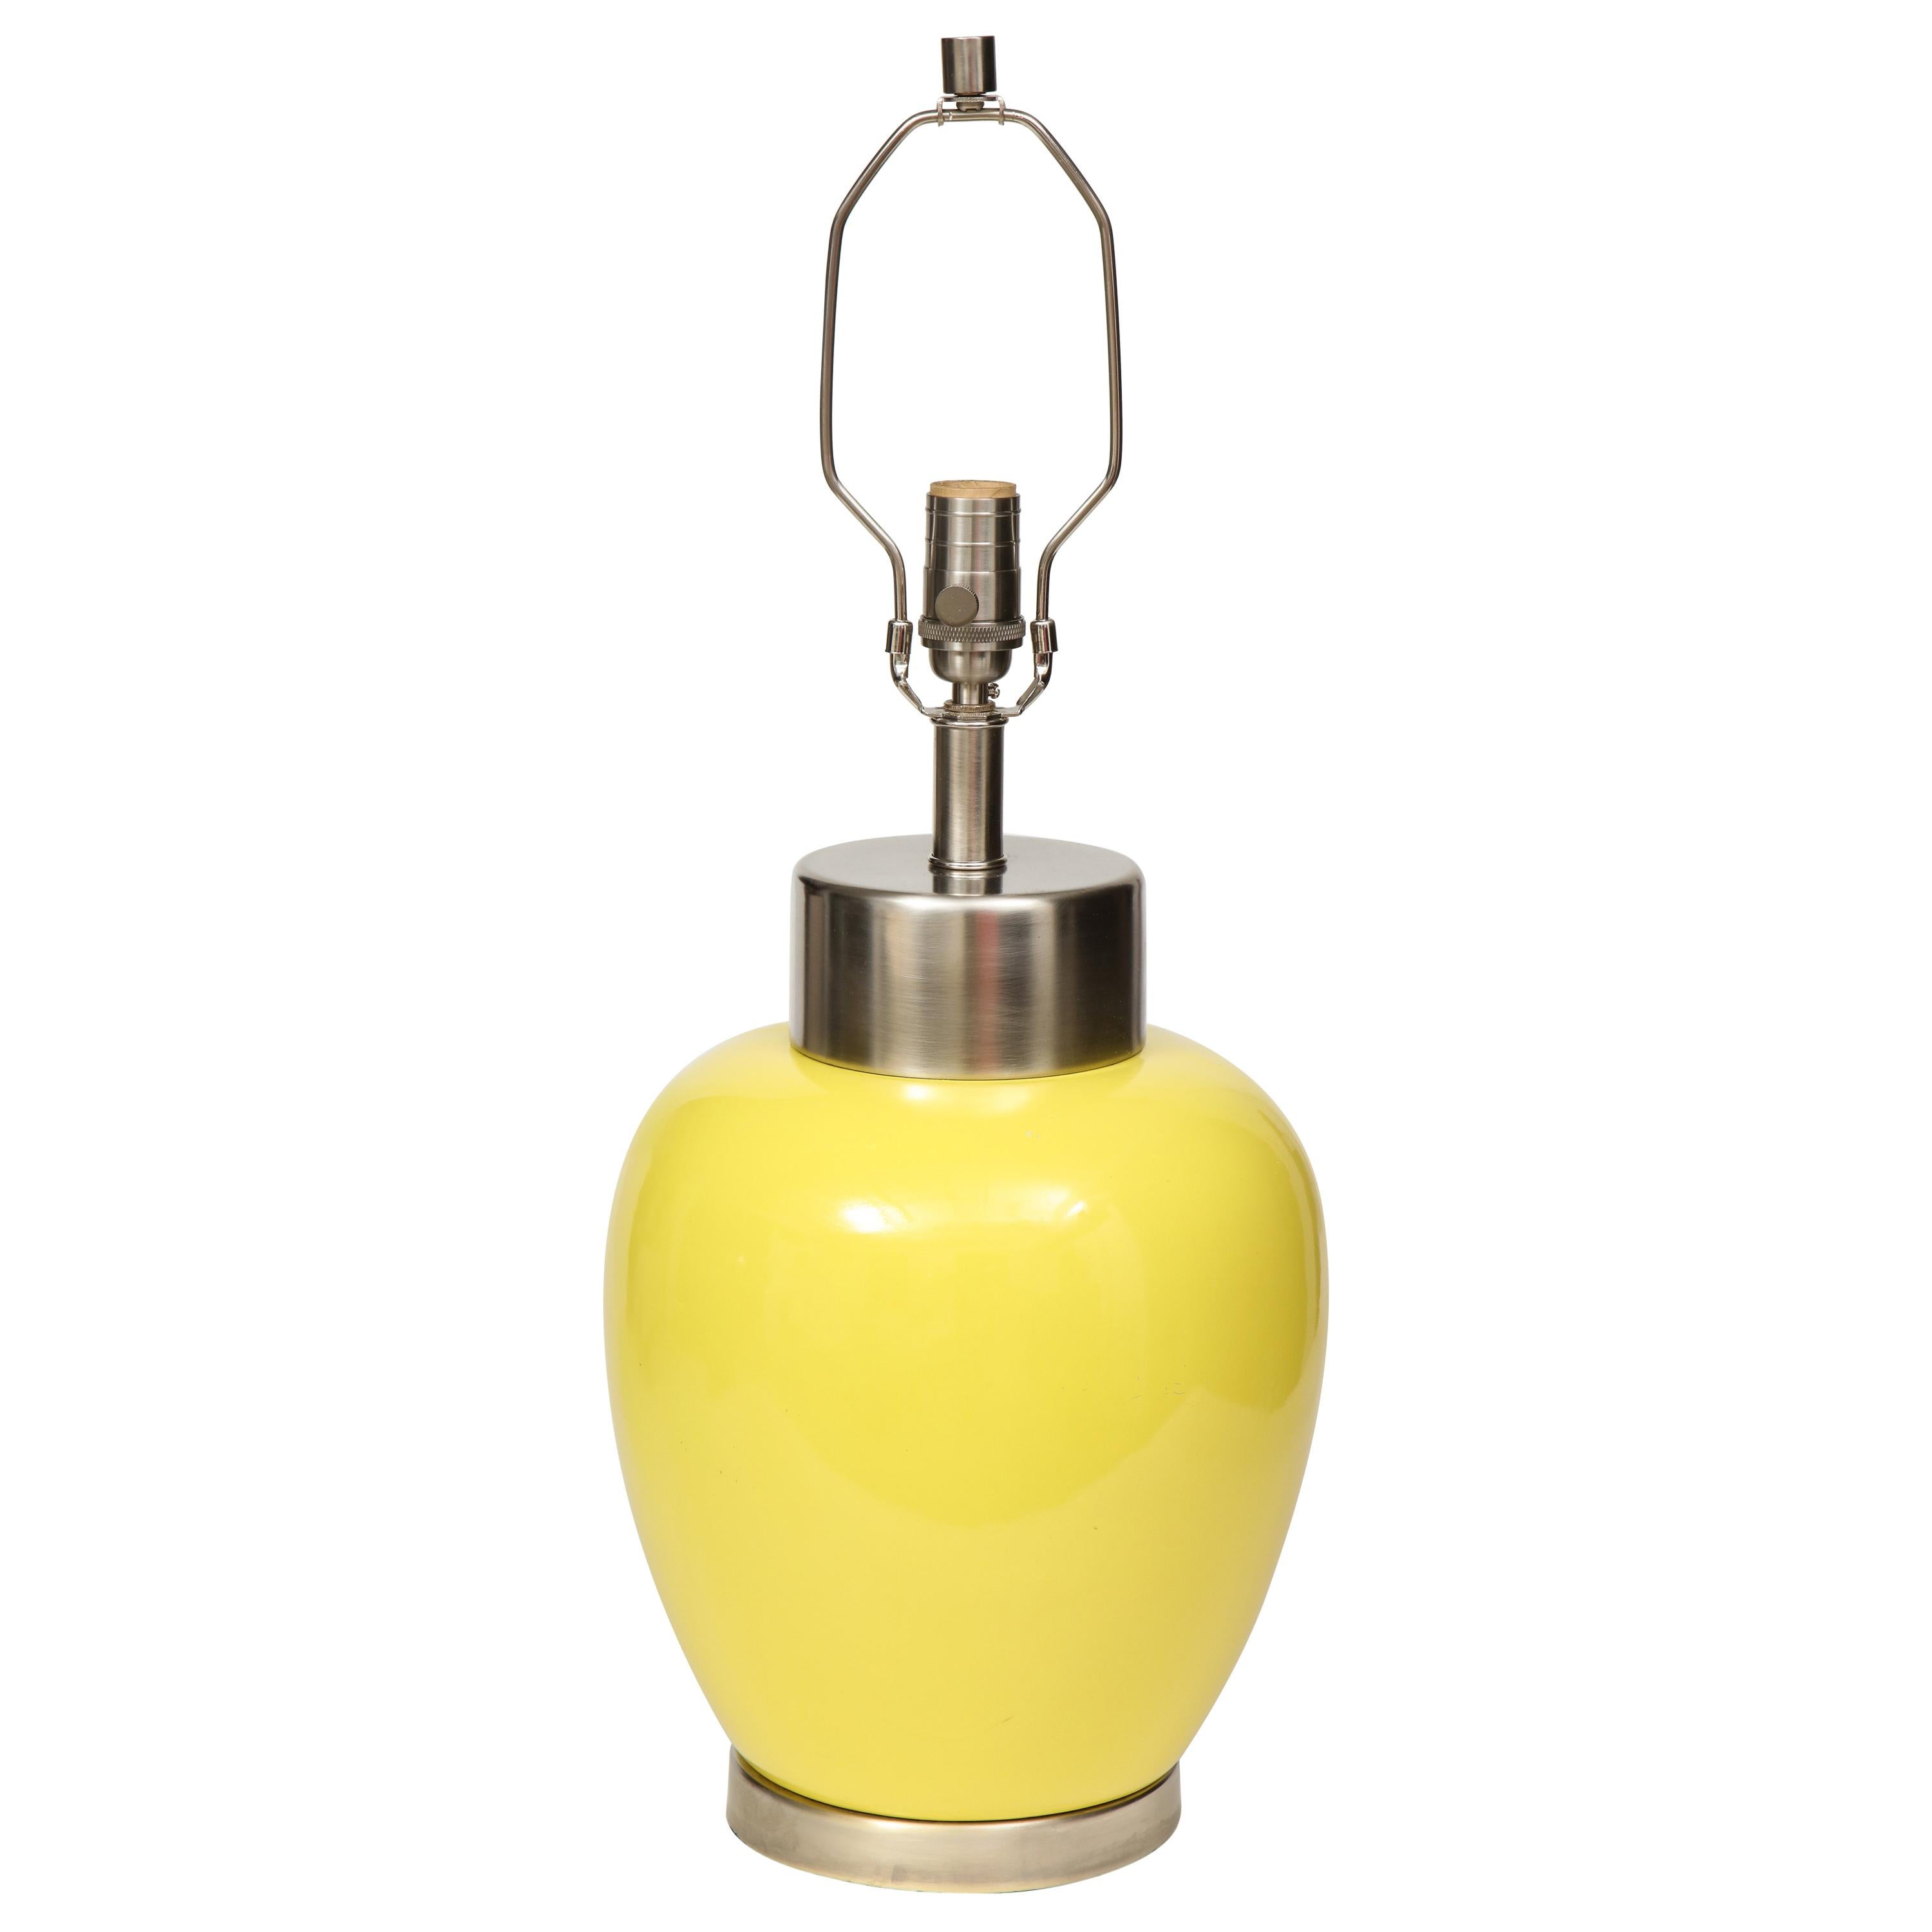 Pair of midcentury porcelain lamps with a lemon yellow glaze and brushed nickel hardware. 100W max bulbs. Rewired for use in USA.